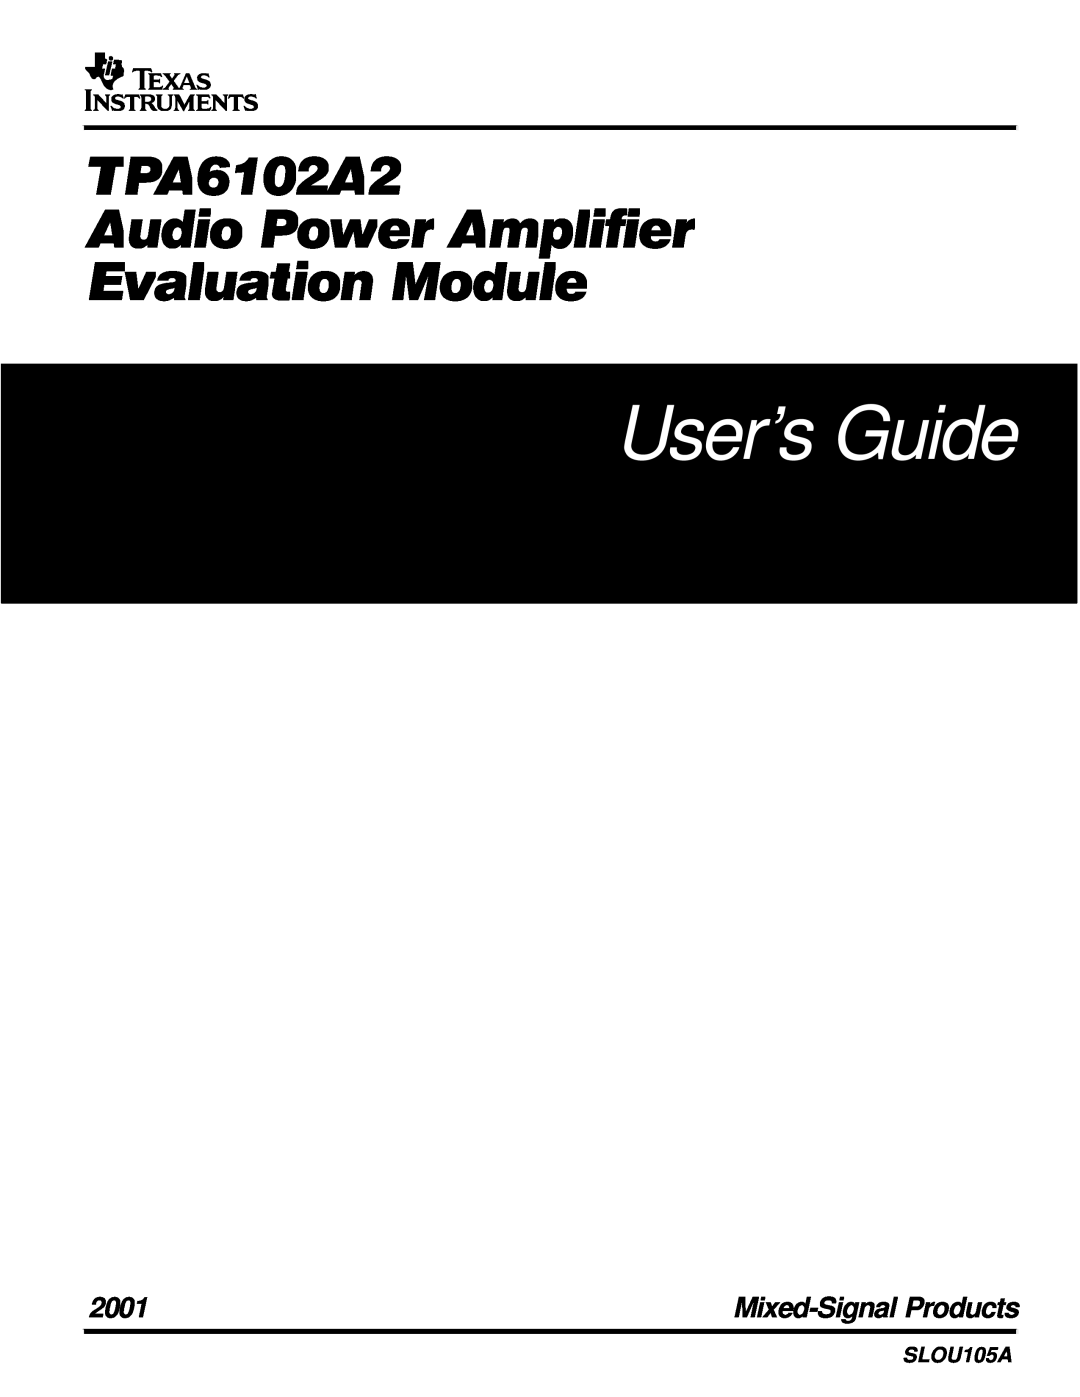 Texas Instruments TPA6102A2 manual User’s Guide, EvaluATPA6udio102A2ationPowerModuleAmplifier, 2001, Mixed-SignalProducts 